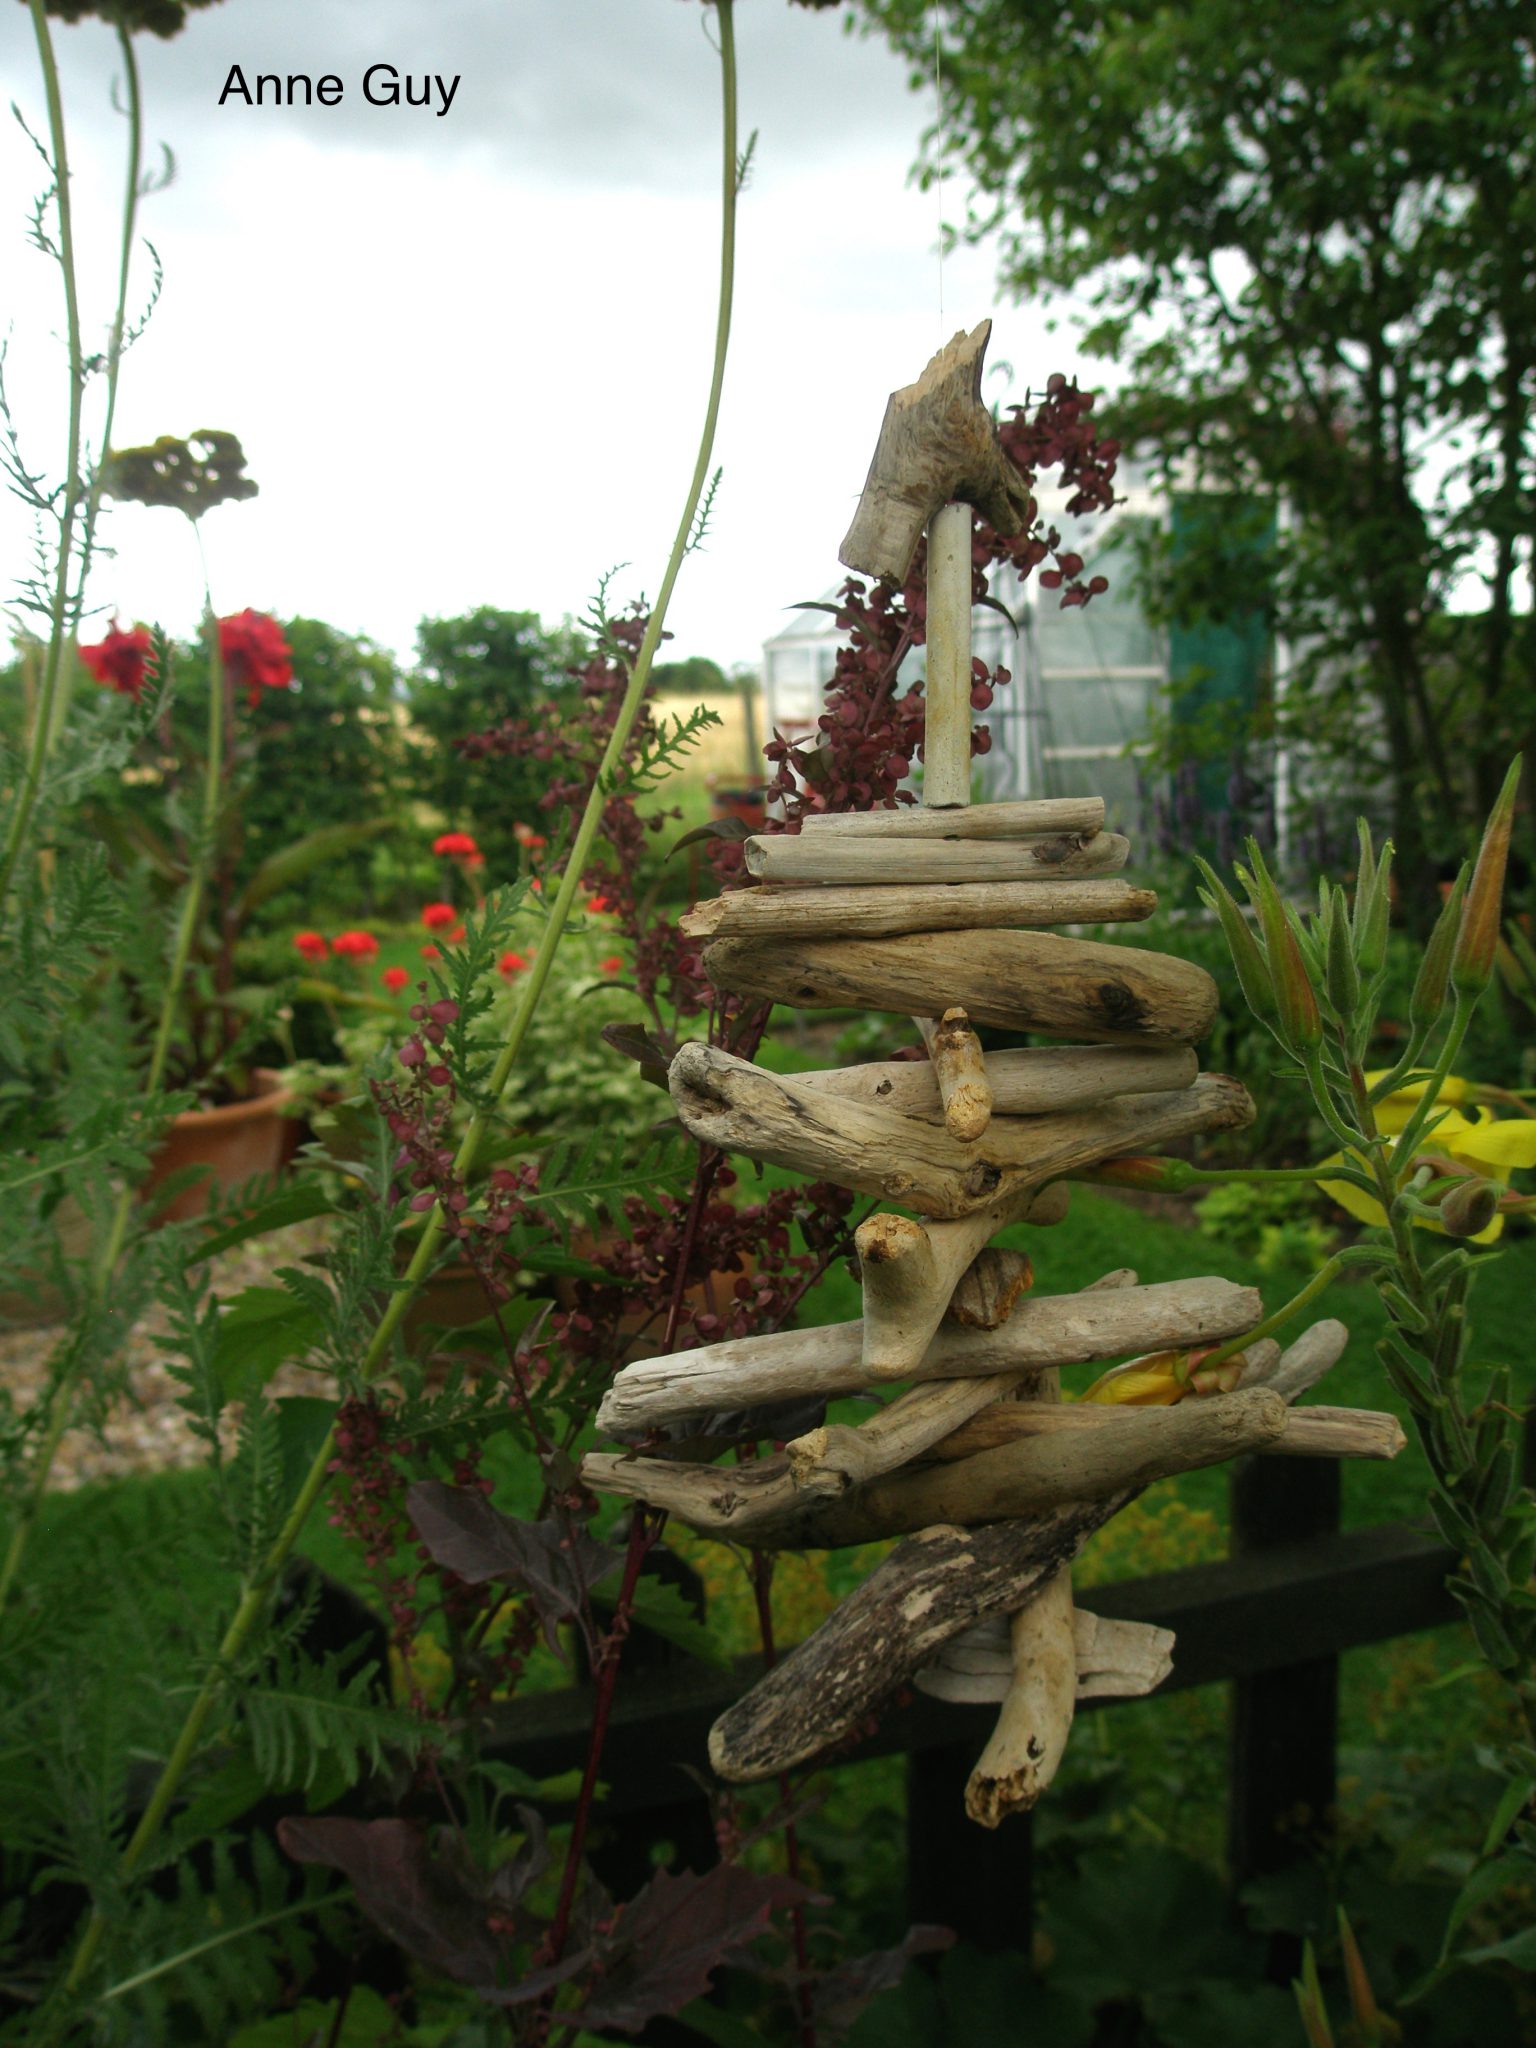 Anne makes sculptures from driftwood